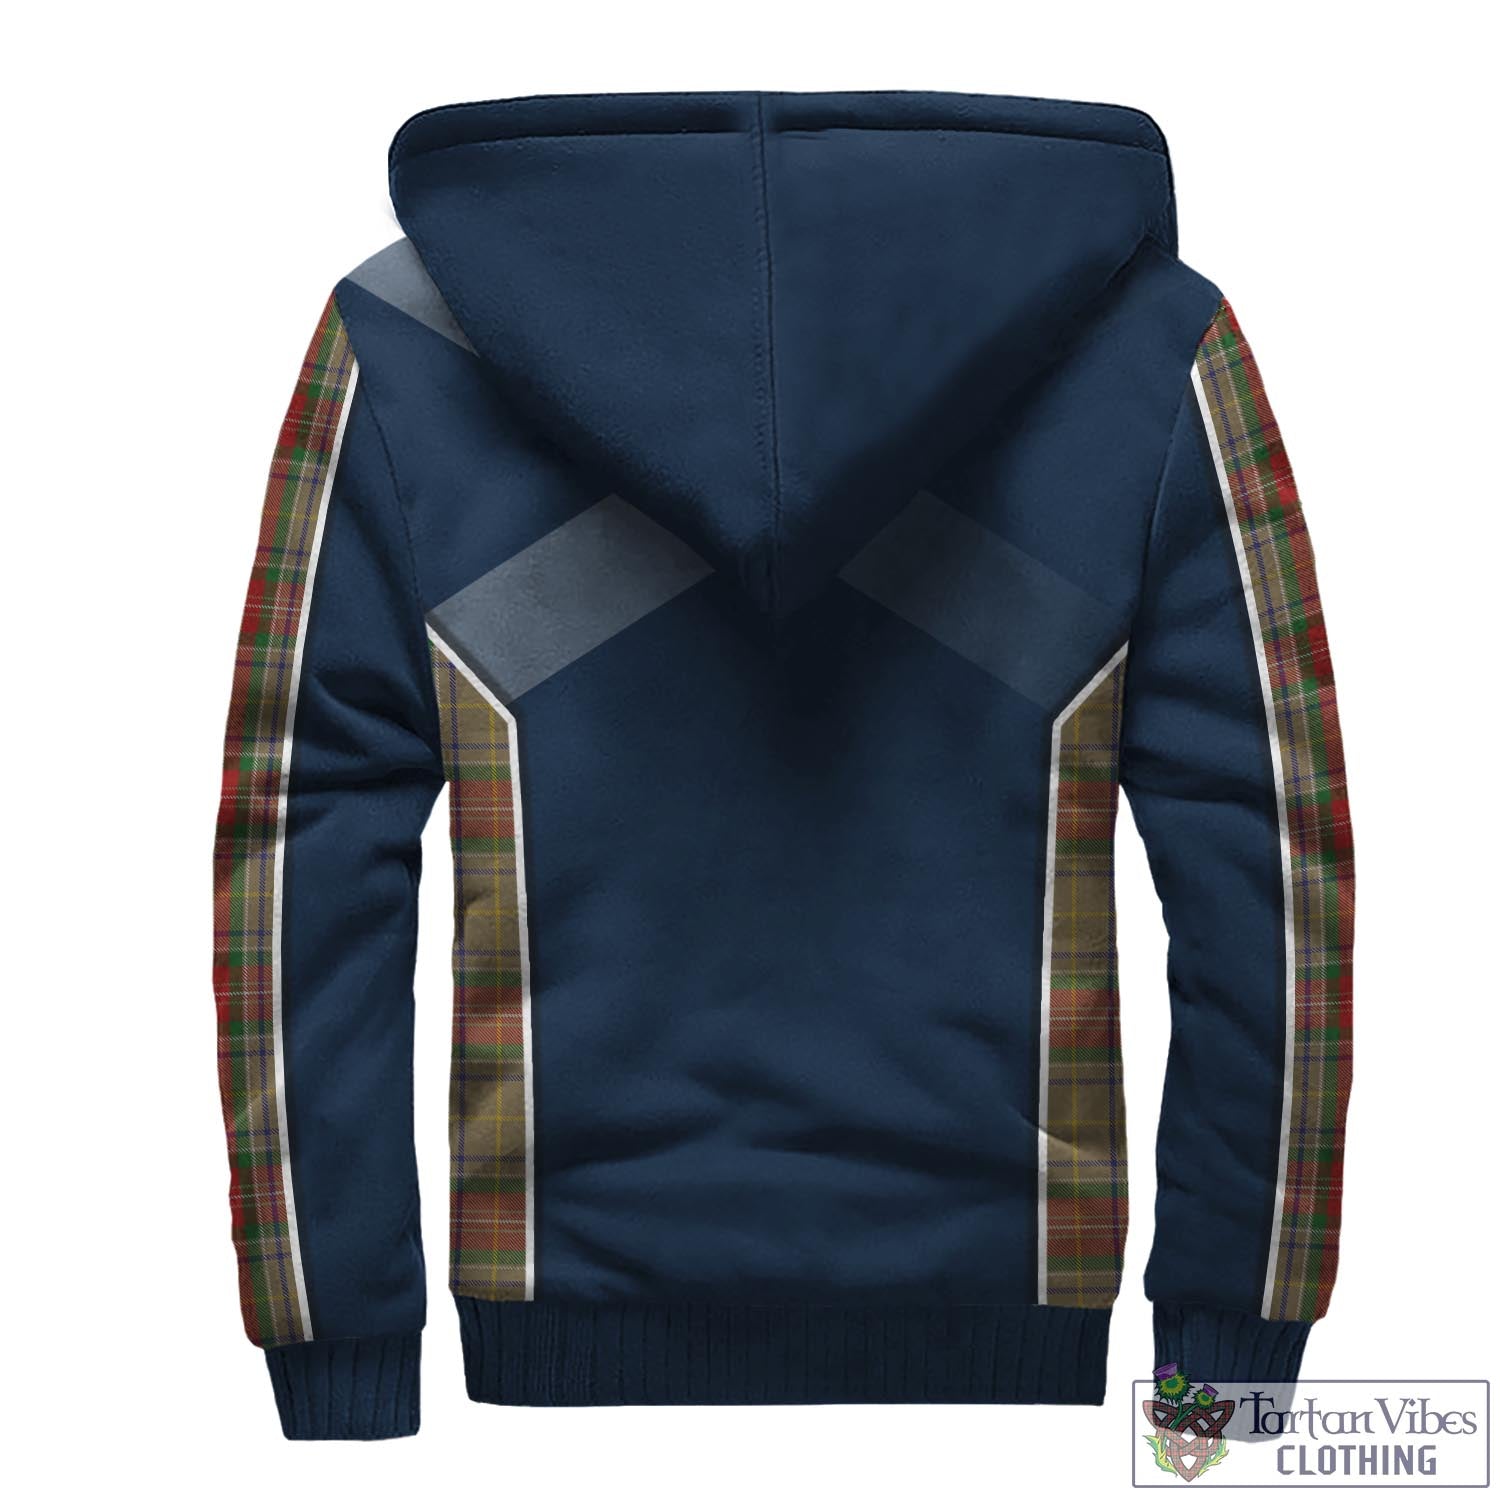 Tartan Vibes Clothing Muirhead Old Tartan Sherpa Hoodie with Family Crest and Scottish Thistle Vibes Sport Style